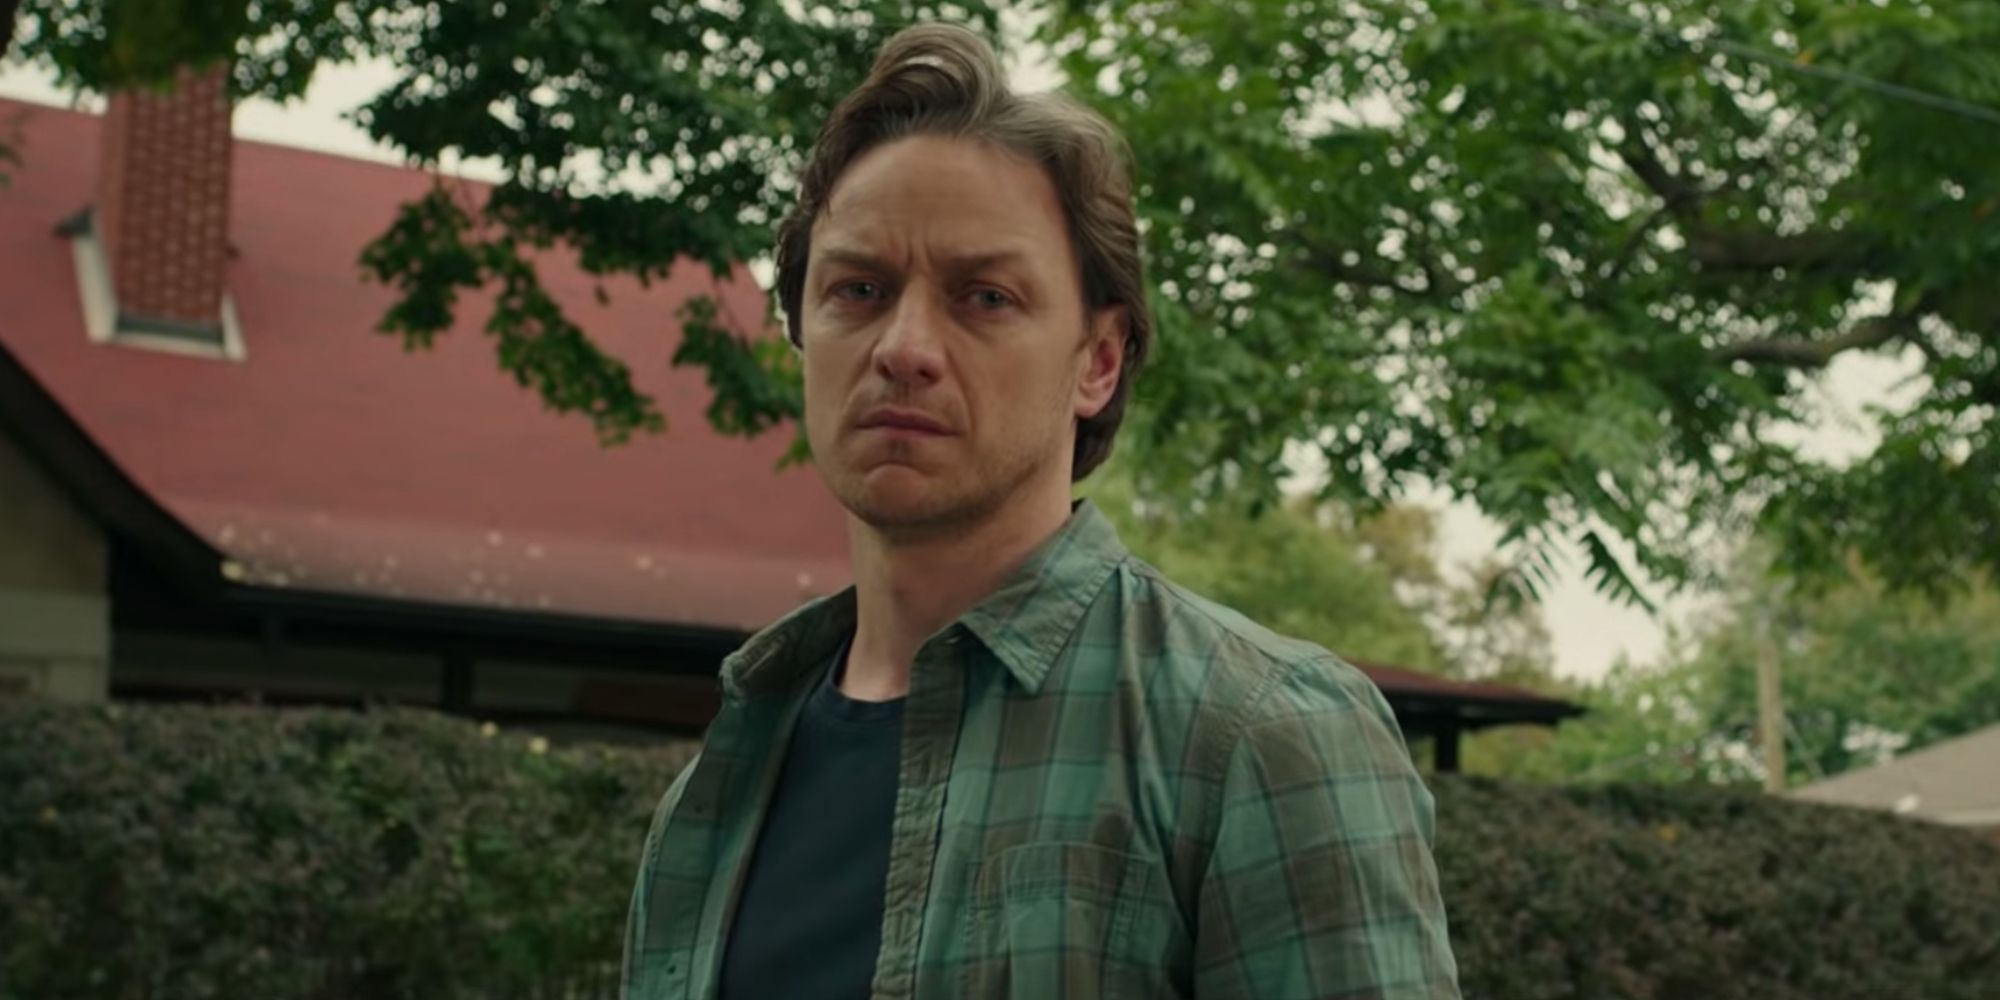 James McAvoy as adult Bill Denbrough in IT: Chapter Two